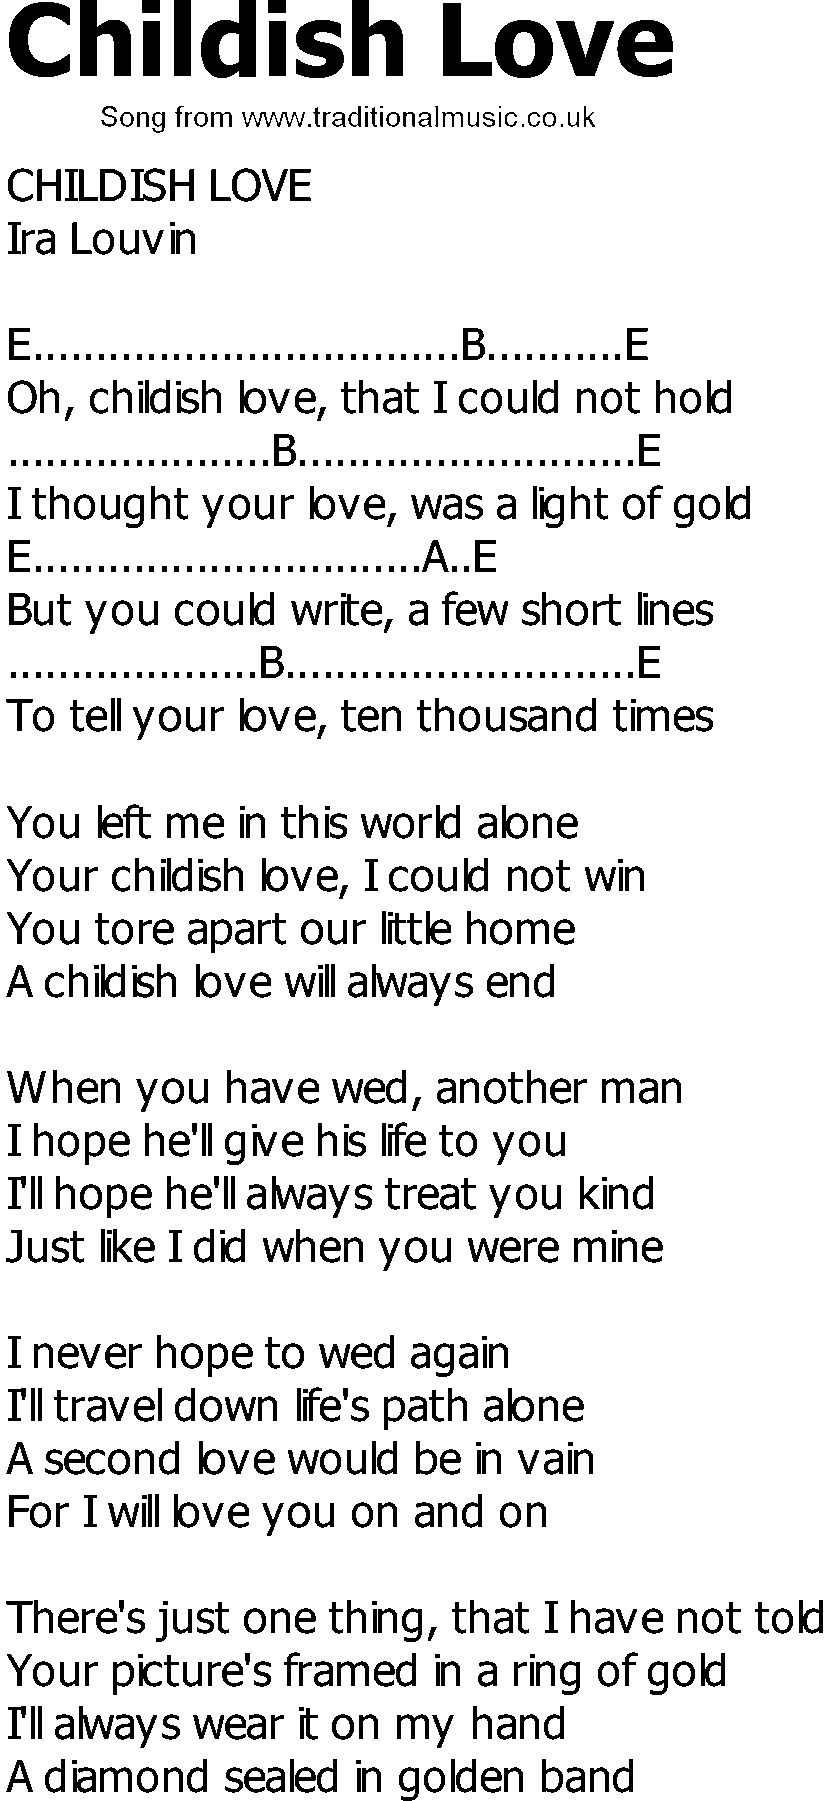 Old Country song lyrics with chords - Childish Love